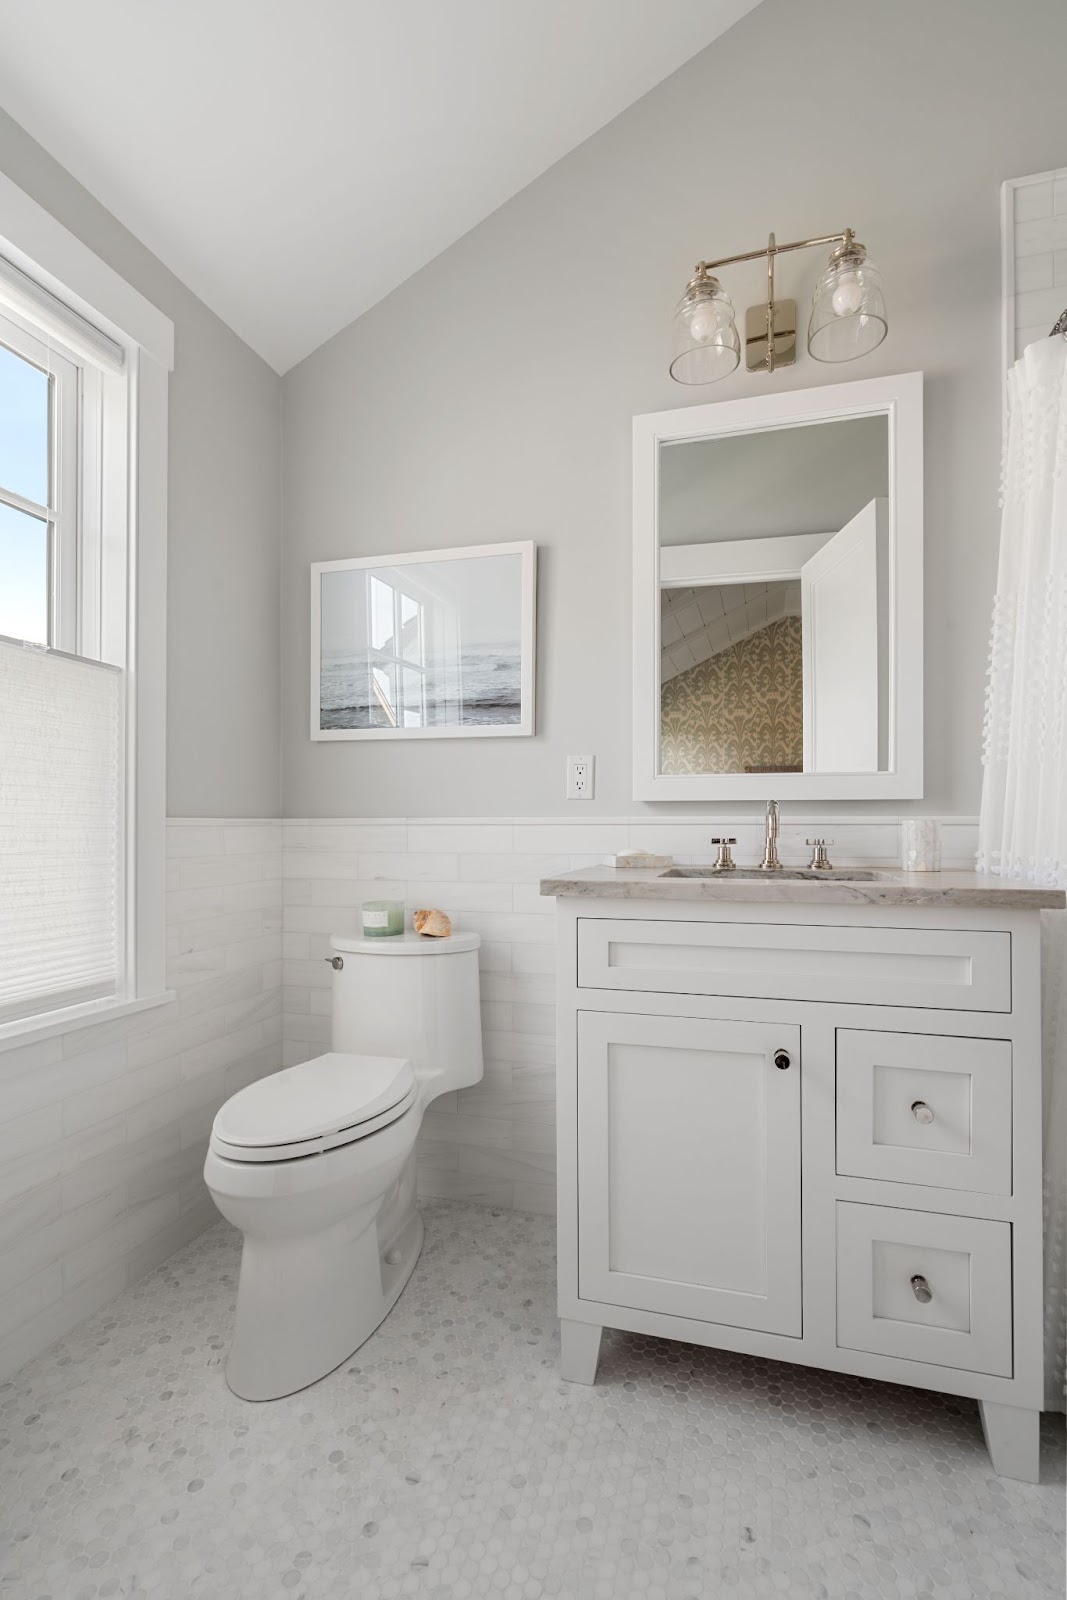 The picture depicts a bathroom with white tile flooring and gray walls. The sink includes white cabinets, a marble countertop, and a golden light fixture.